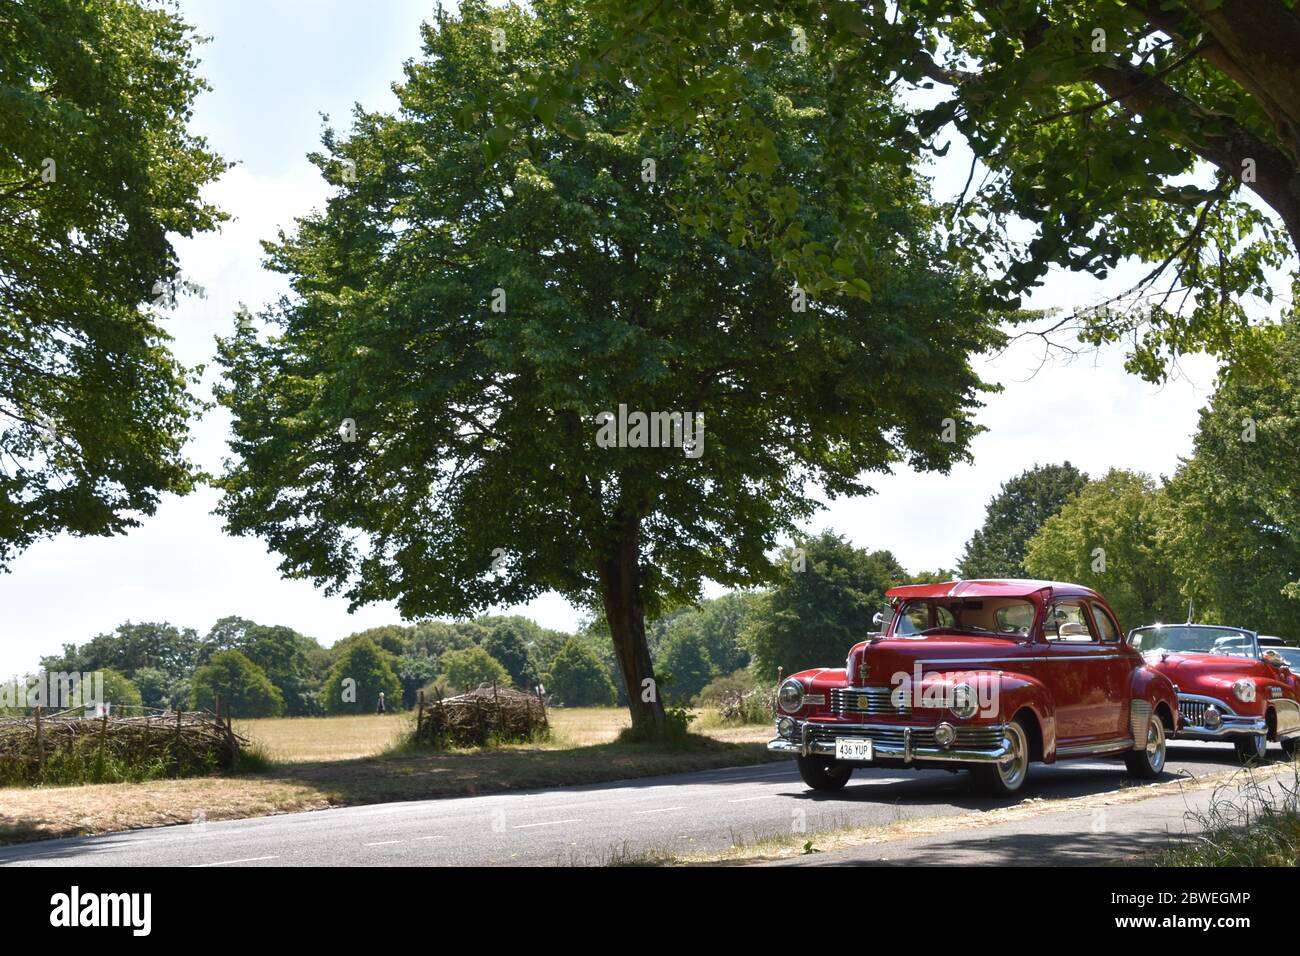 A Classic red vintage car 1946-1947 Nash Stock Photo